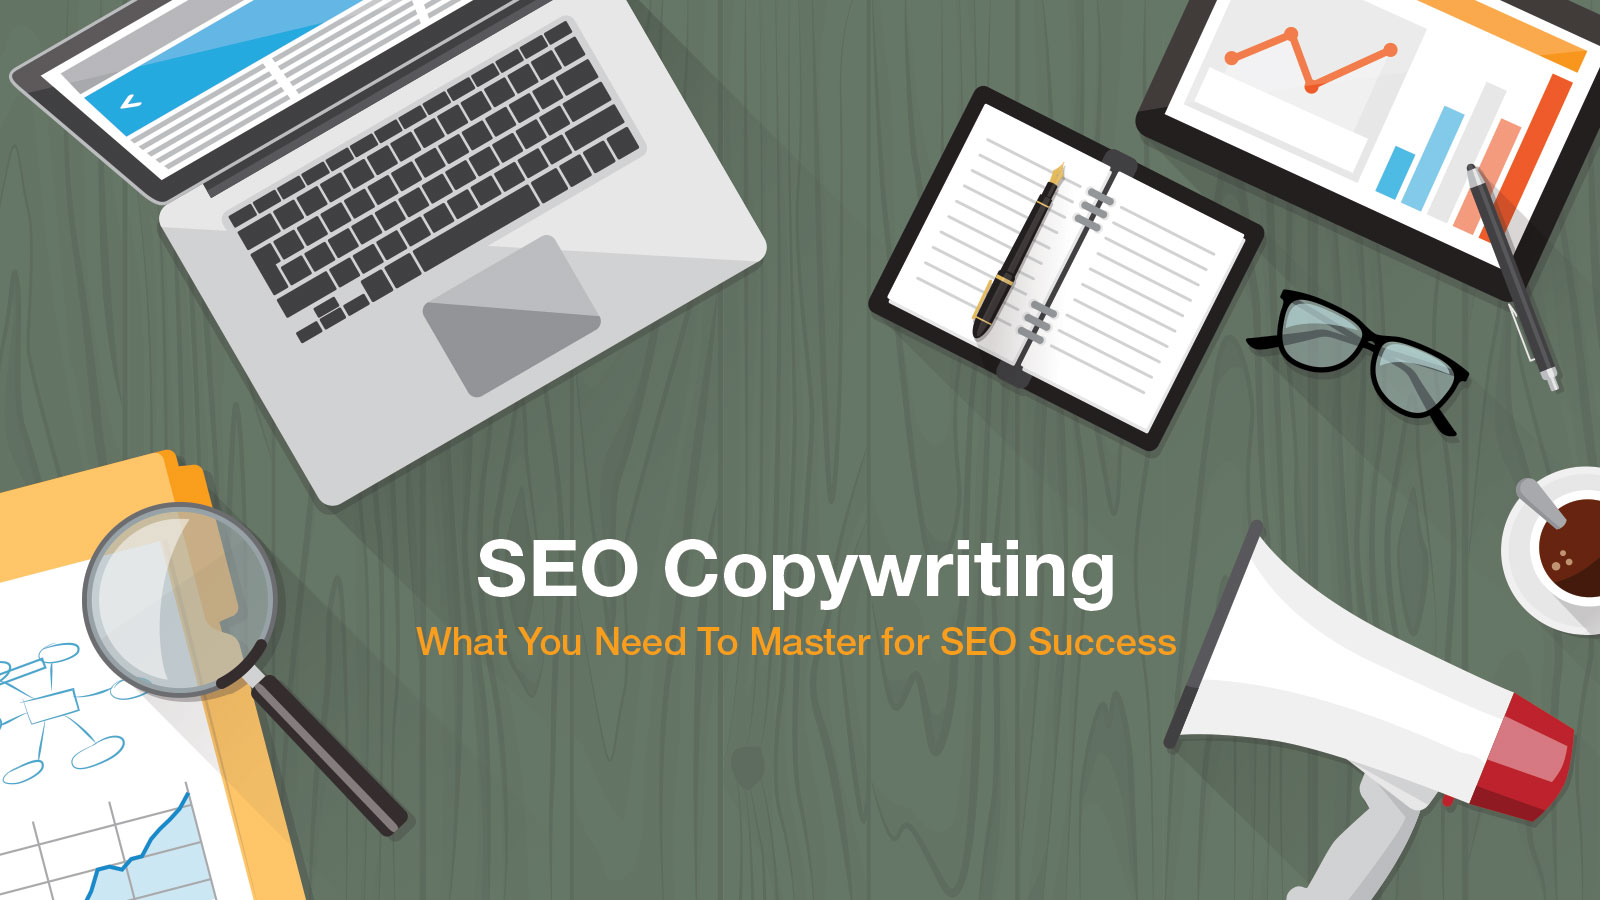 Seo Copywriting: How to Write for Search Engine Optimization